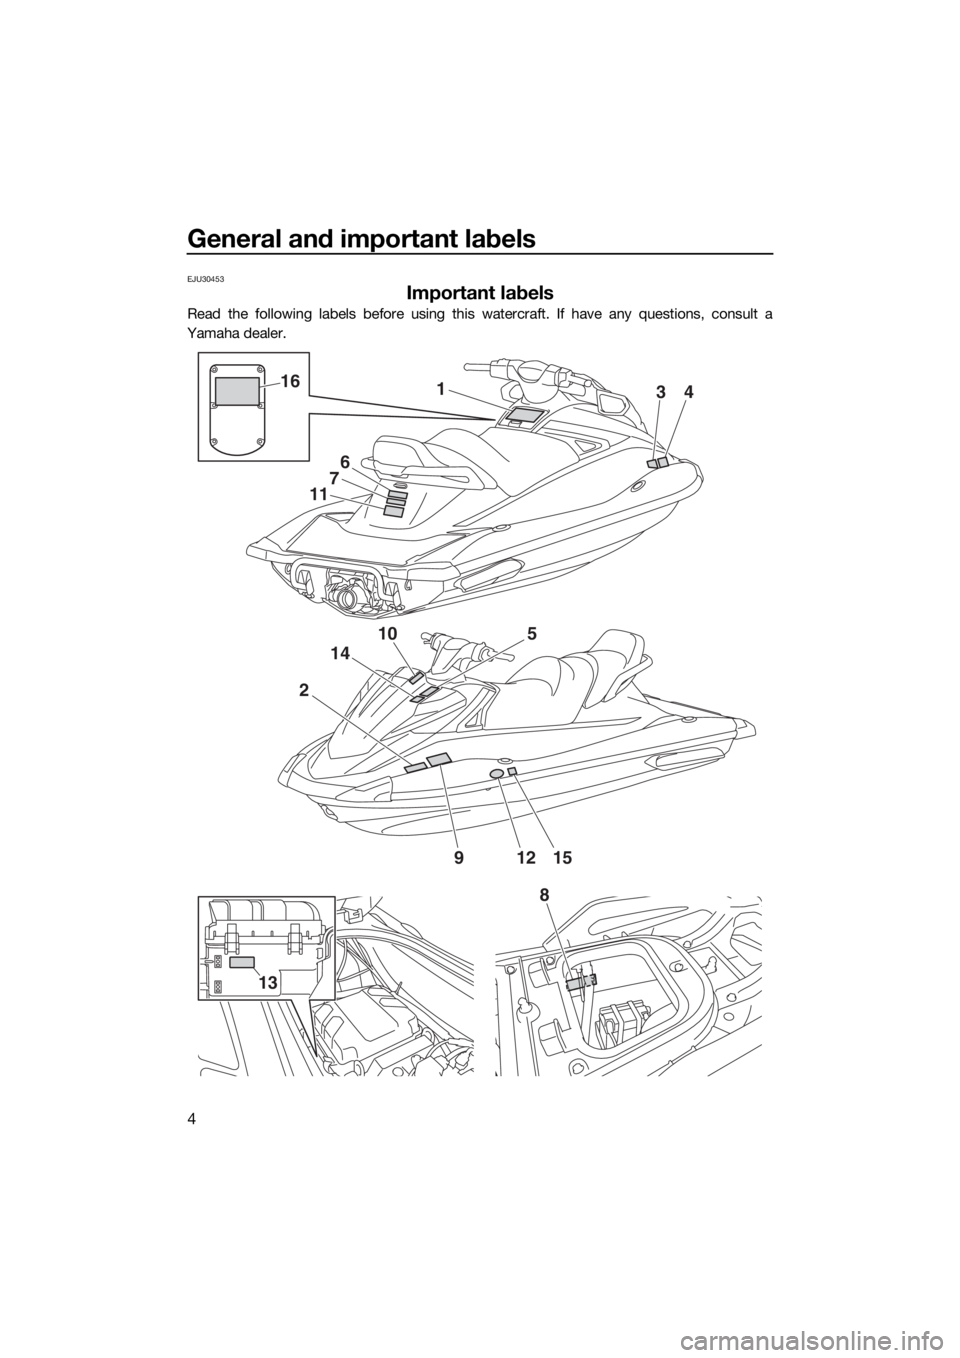 YAMAHA VX DELUXE 2018  Owners Manual General and important labels
4
EJU30453
Important labels
Read the following labels before using this watercraft. If have any questions, consult a
Yamaha dealer.
2
10
14
1
6
7
11
34
5
91512
16
8
13
UF4